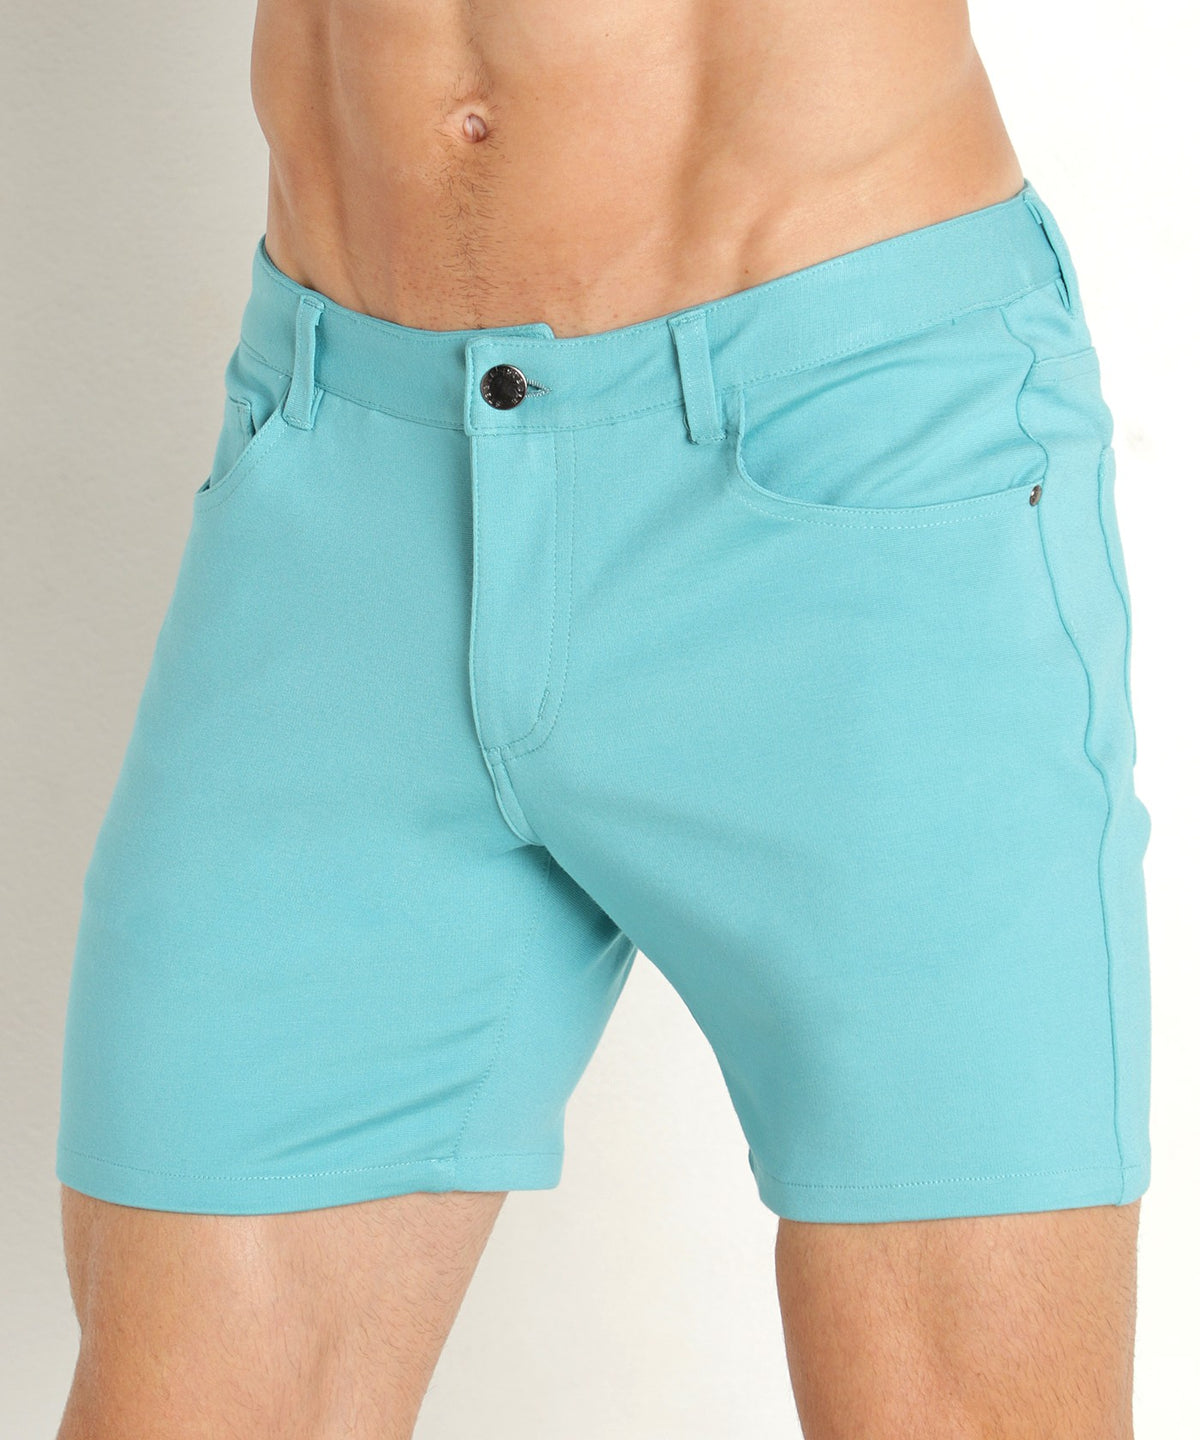 Stretch Knit Shorts (5" inseam) (Nile Teal)